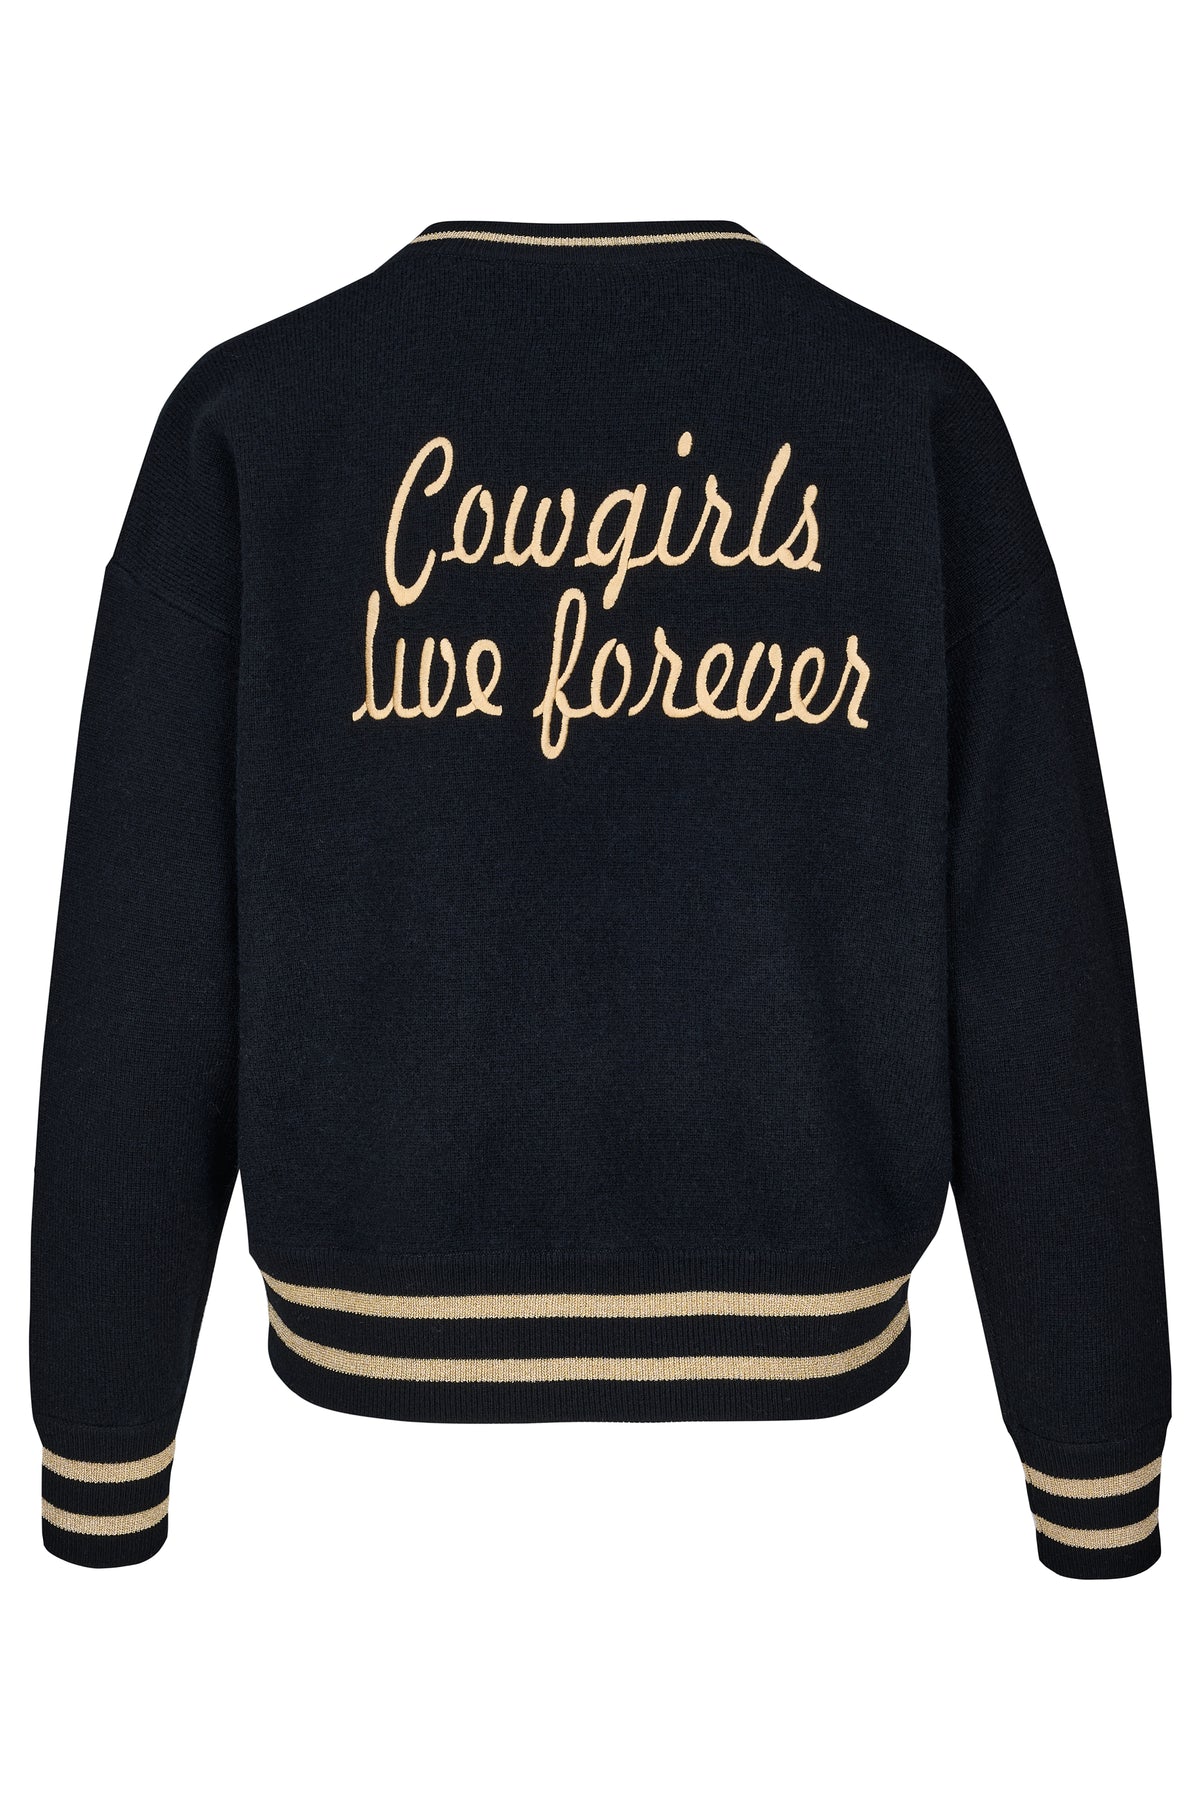 Cowgirls Live Forever Bomber in Black and Gold